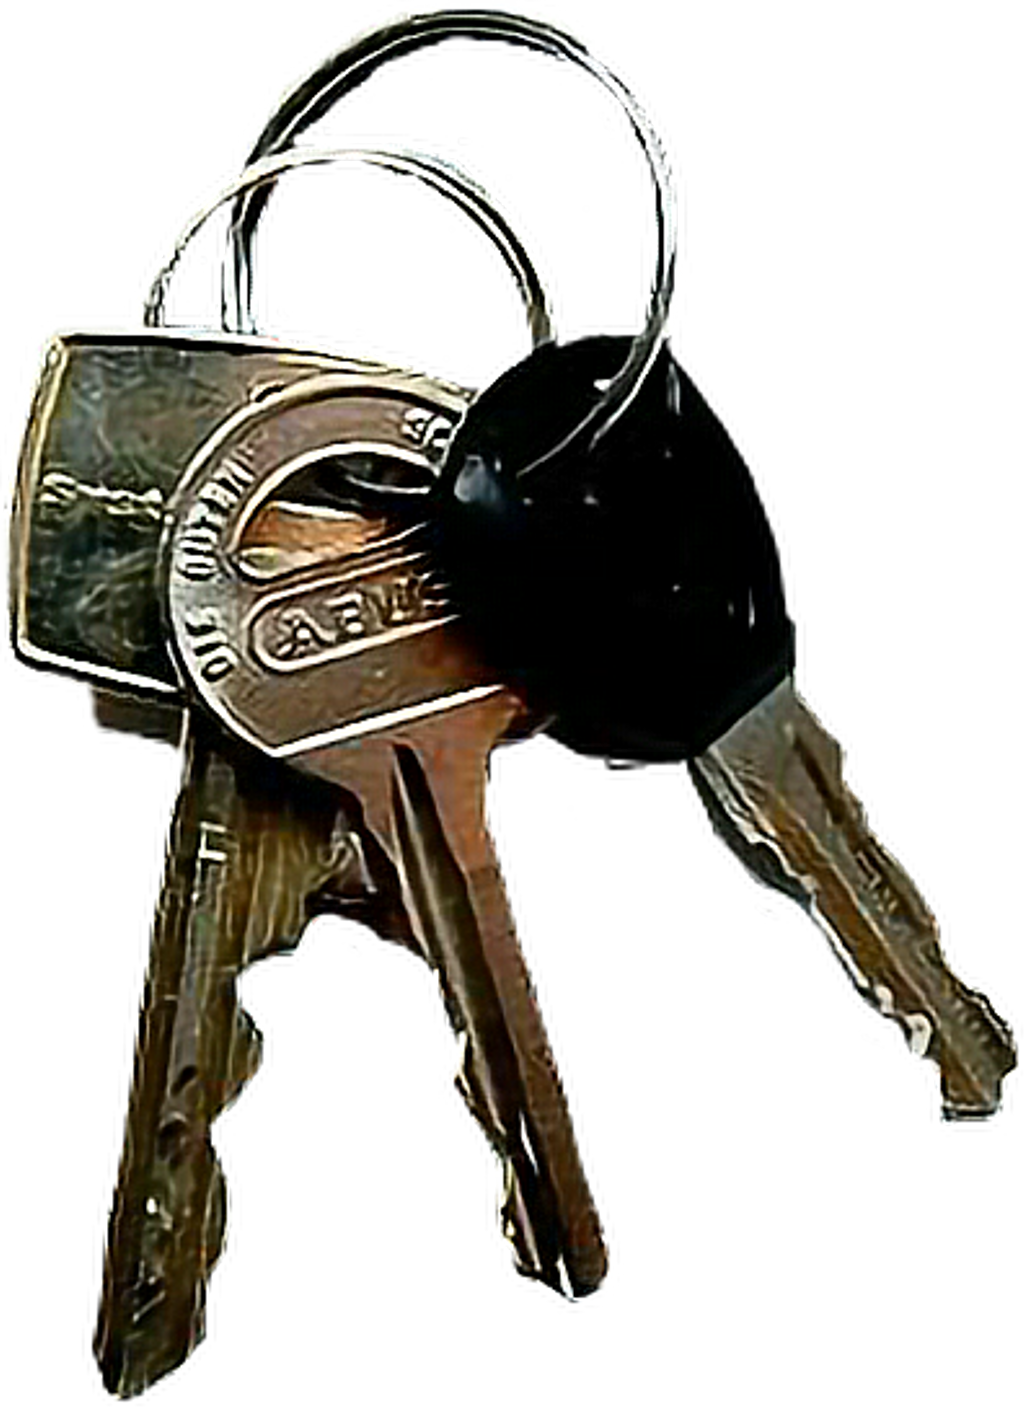 A Bunch Of Keys On A Ring